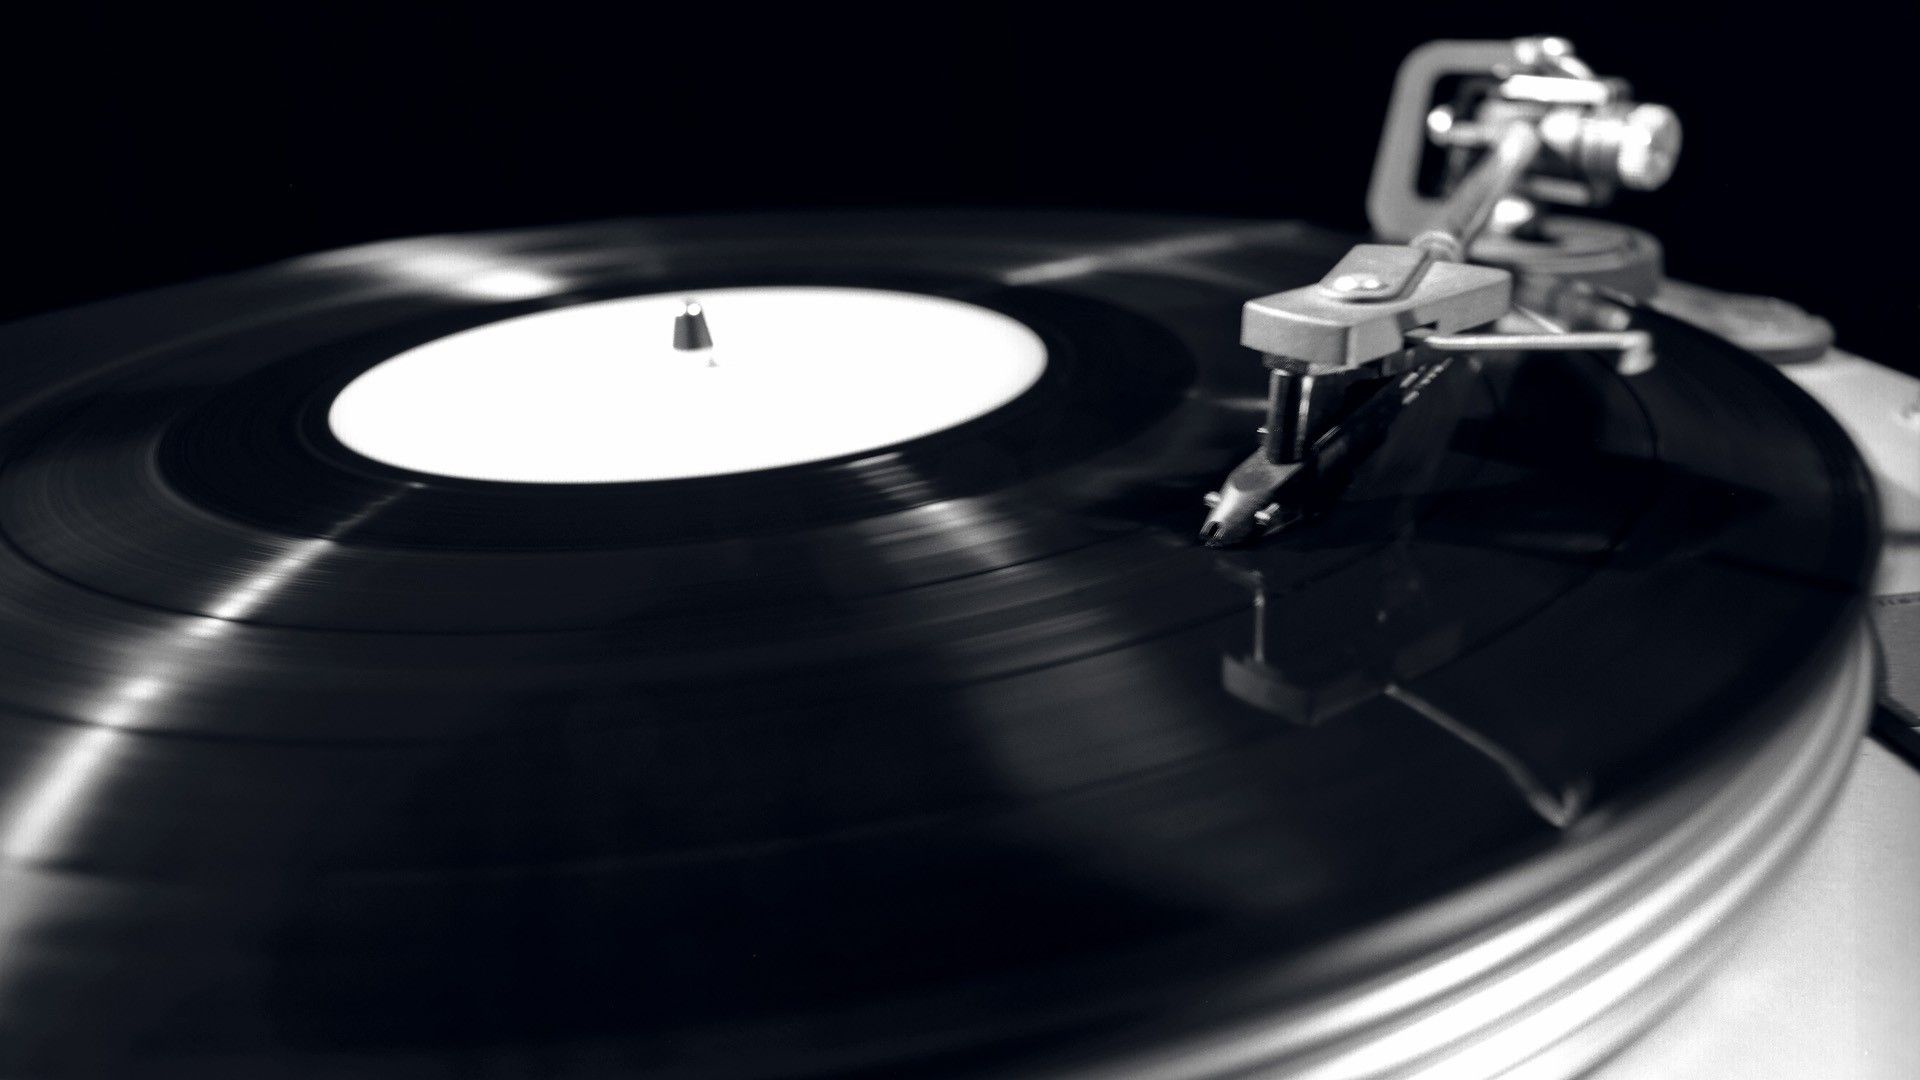 Record Player Vintage Black And White - HD Wallpaper 